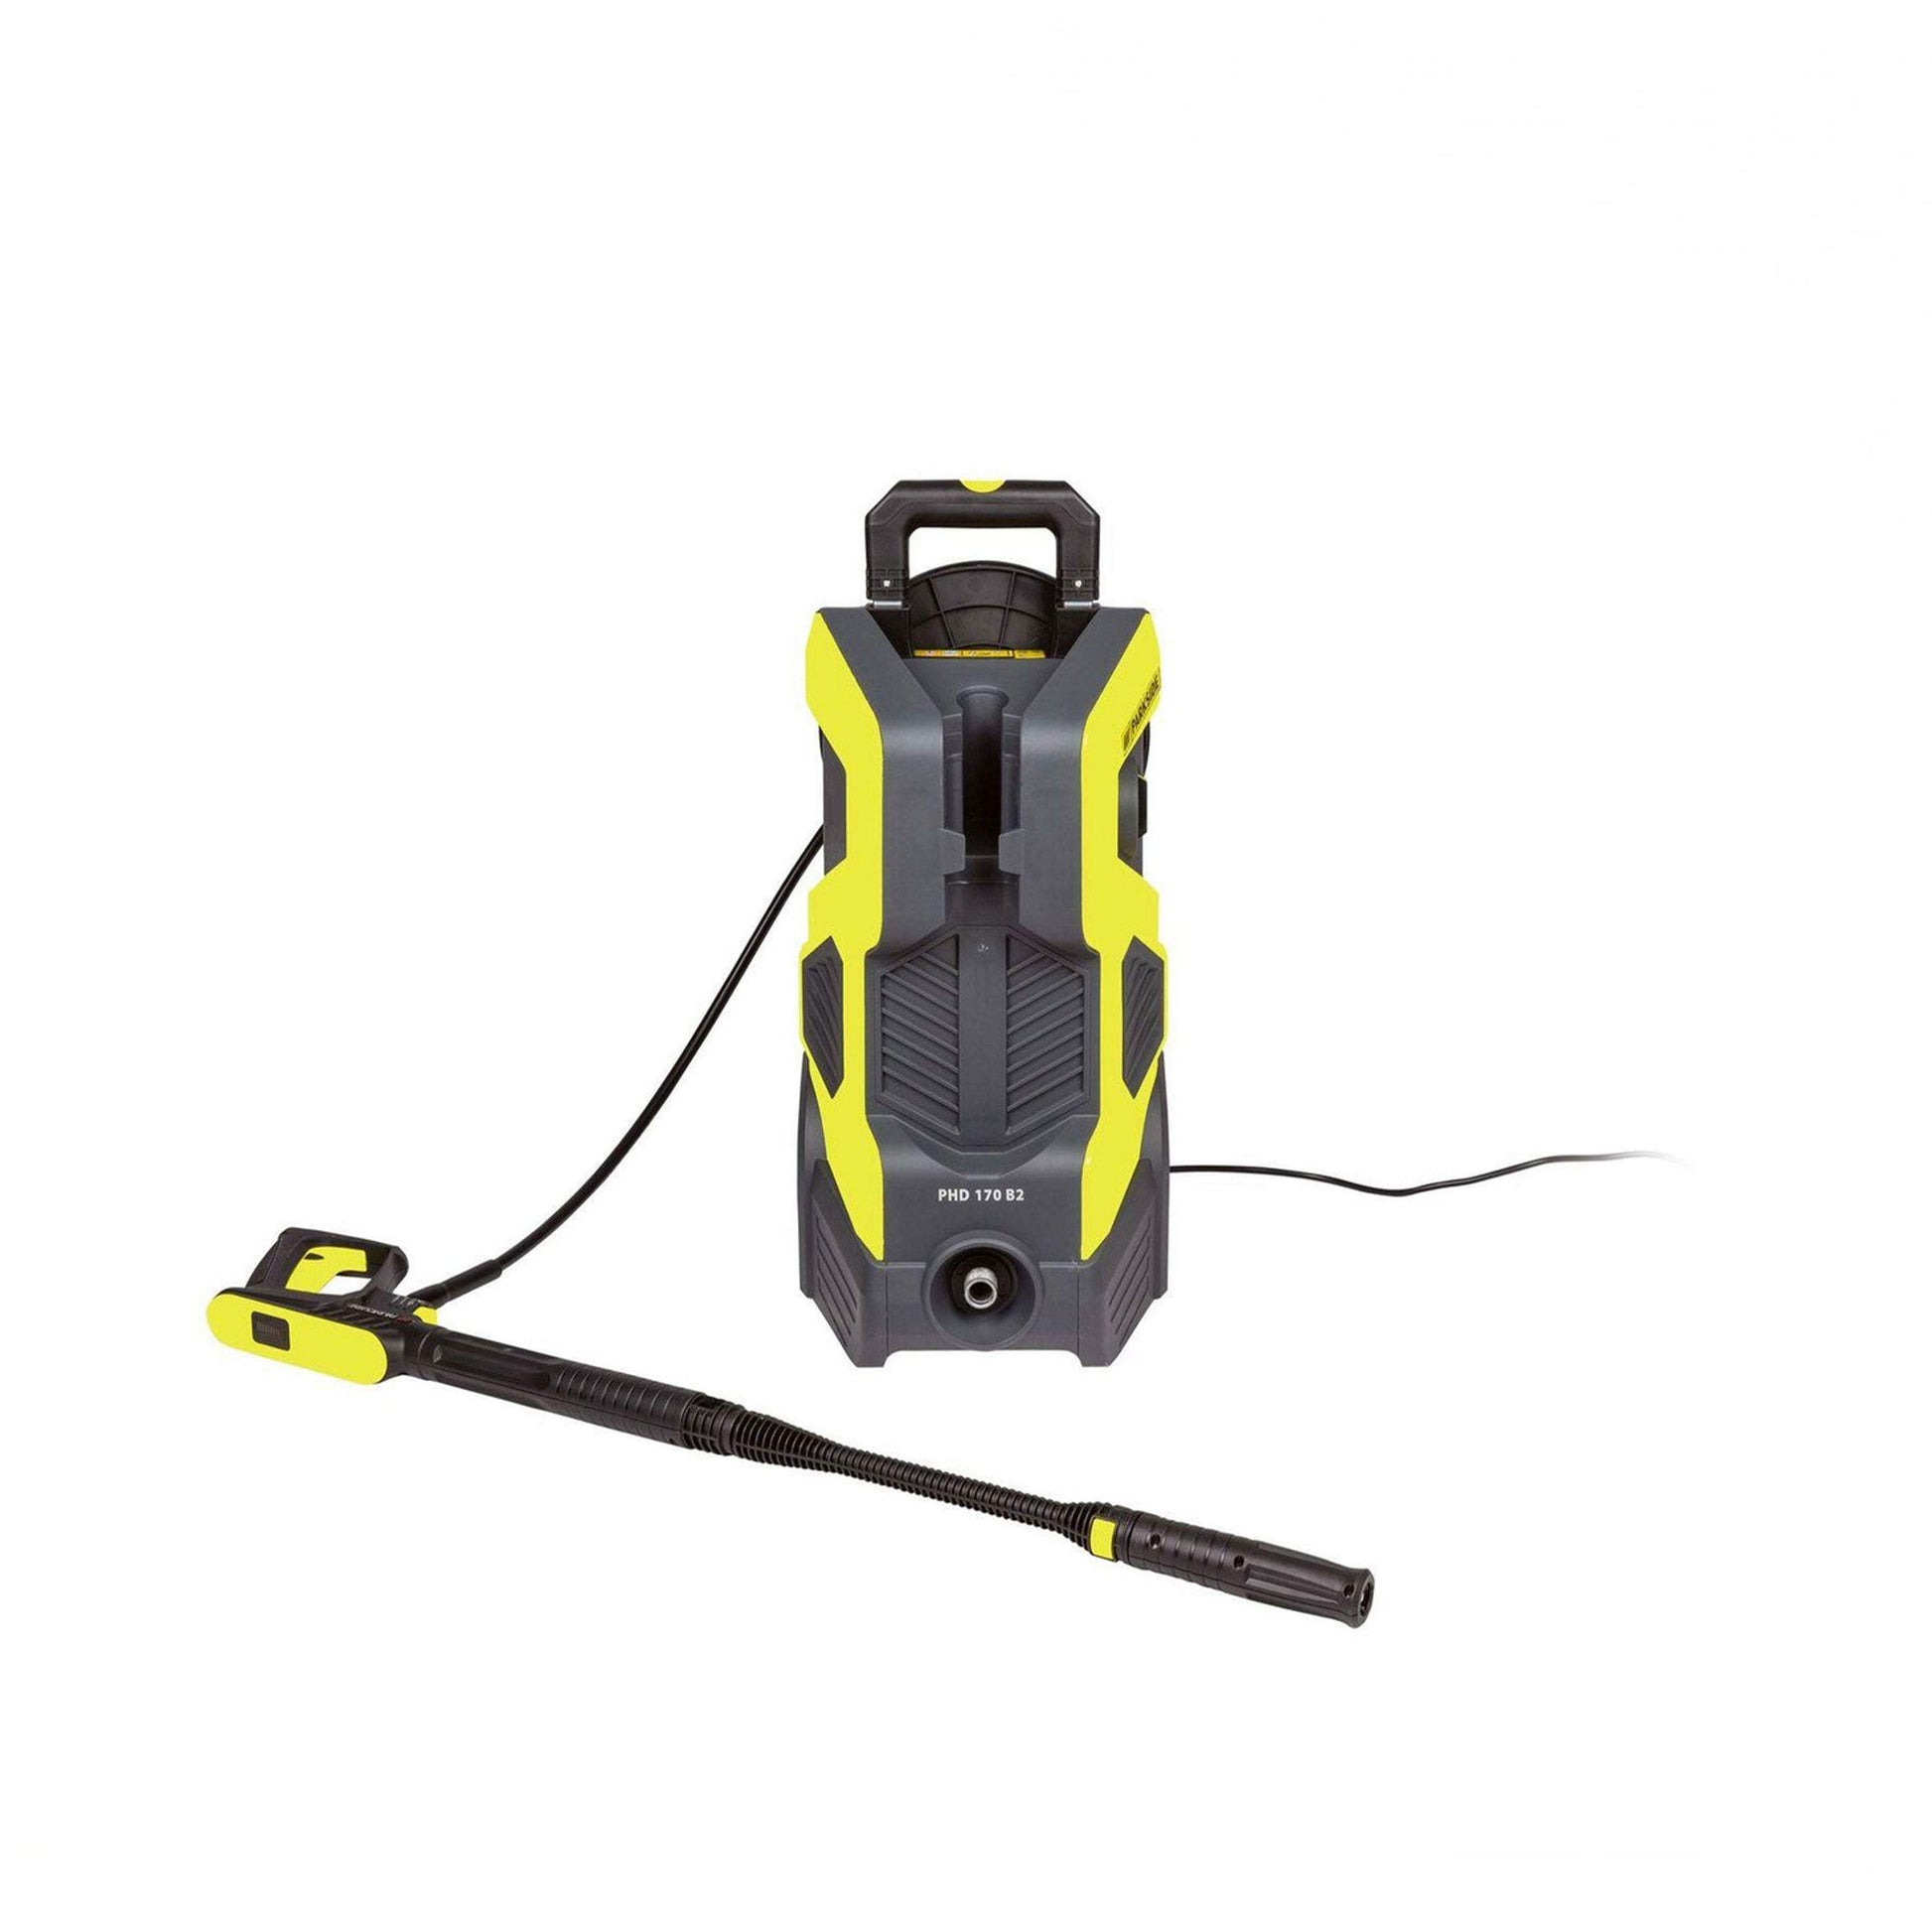 PARKSIDE® Pressure Washer PHD 170 B2, 2400 W-Royal Brands Co-